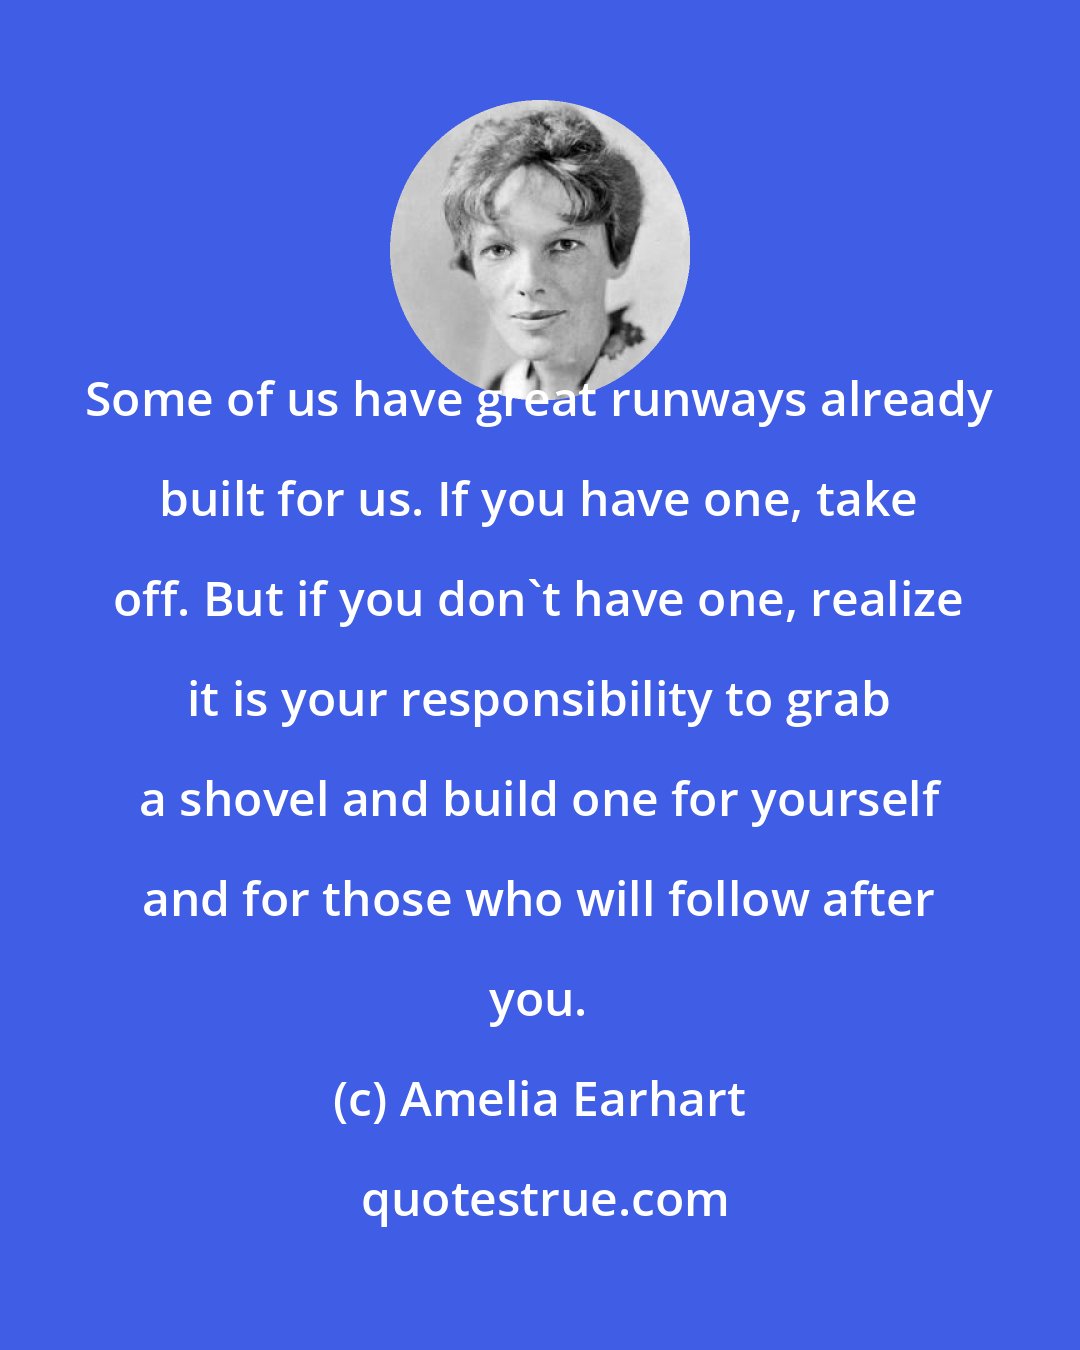 Amelia Earhart: Some of us have great runways already built for us. If you have one, take off. But if you don't have one, realize it is your responsibility to grab a shovel and build one for yourself and for those who will follow after you.